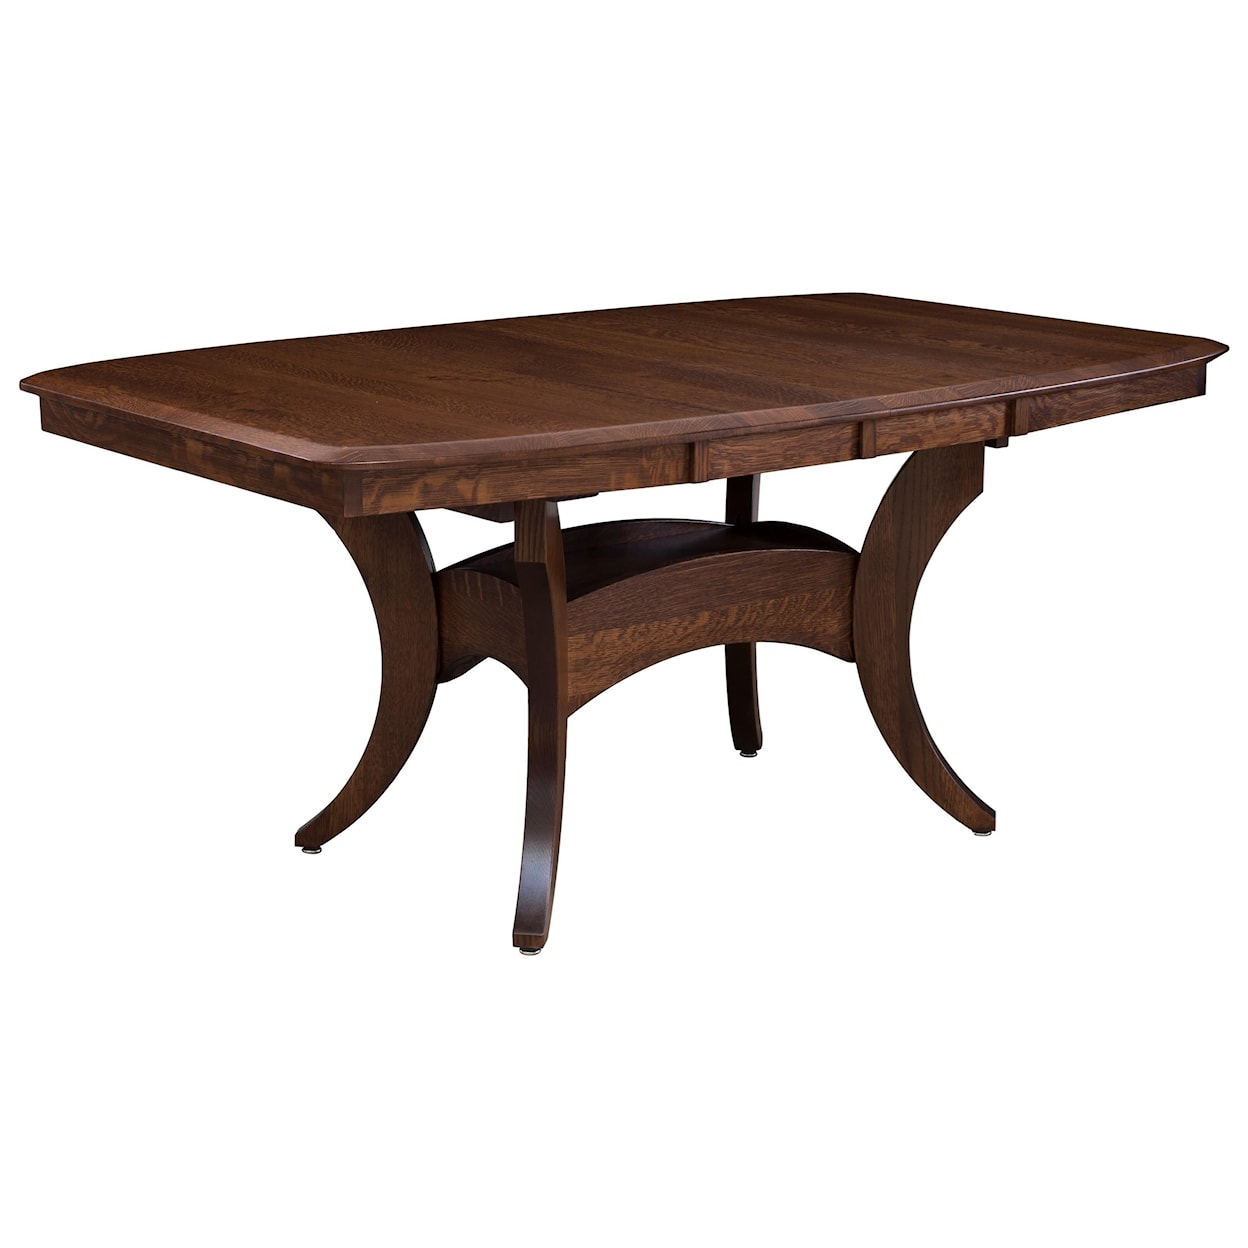 Amish Dining Room Fort Knox 42x66" Dining Table